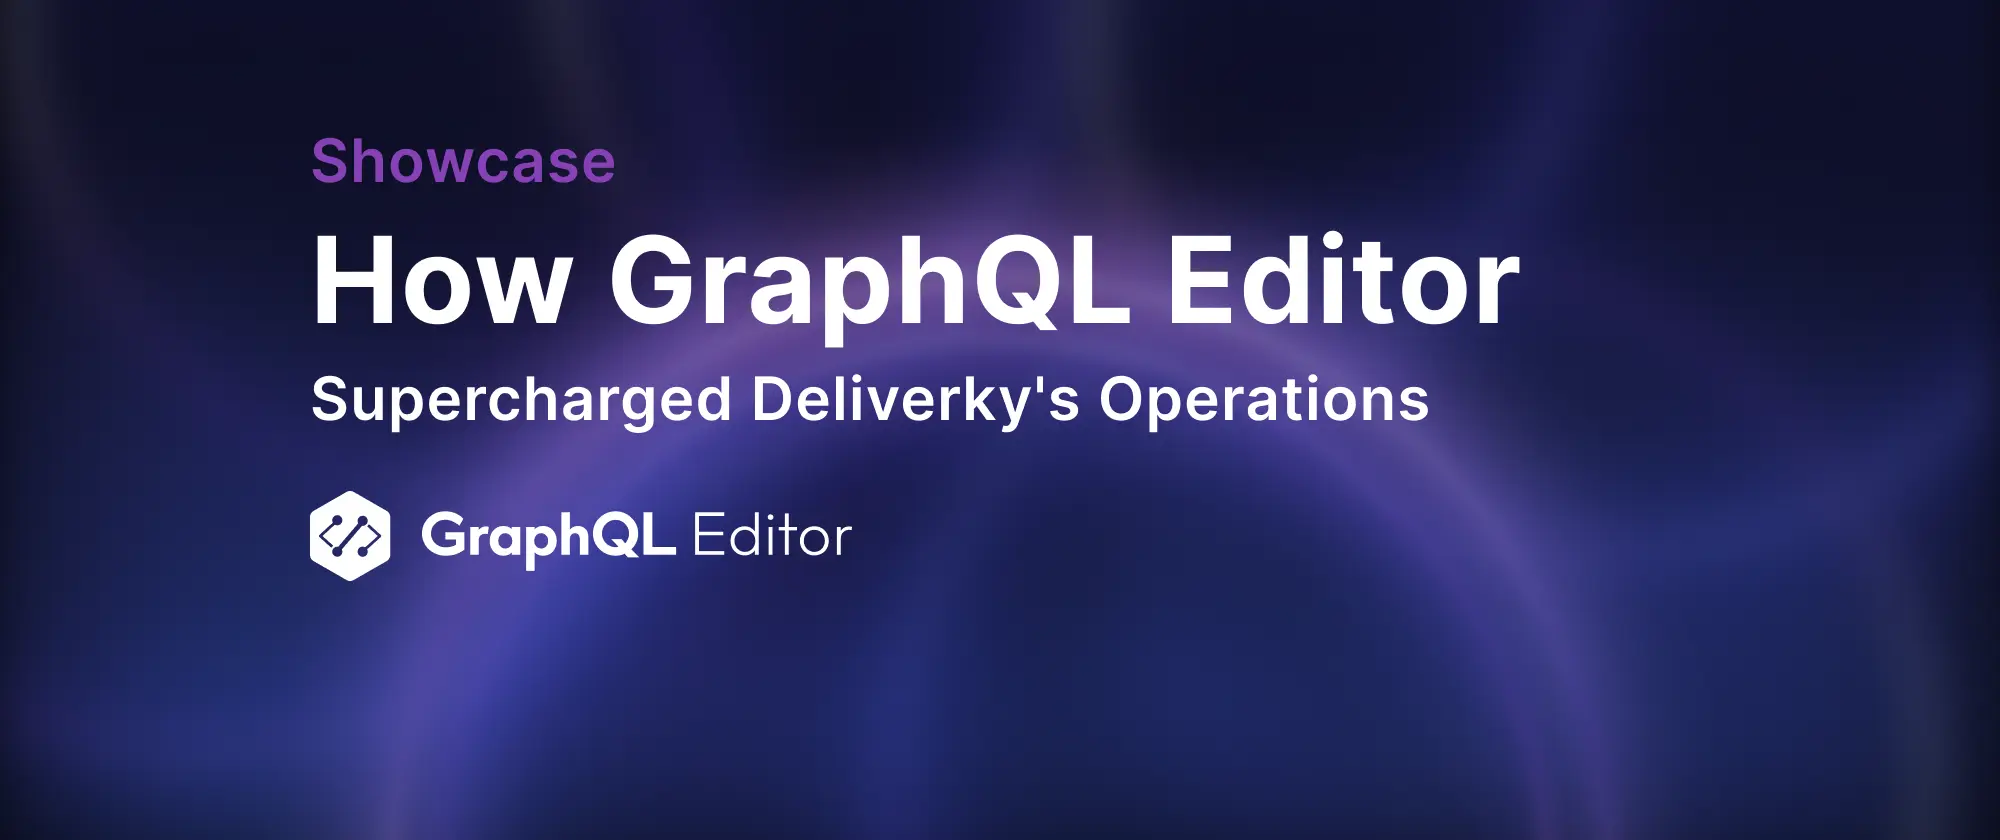 How GraphQL Editor Supercharged Deliverky's Operations